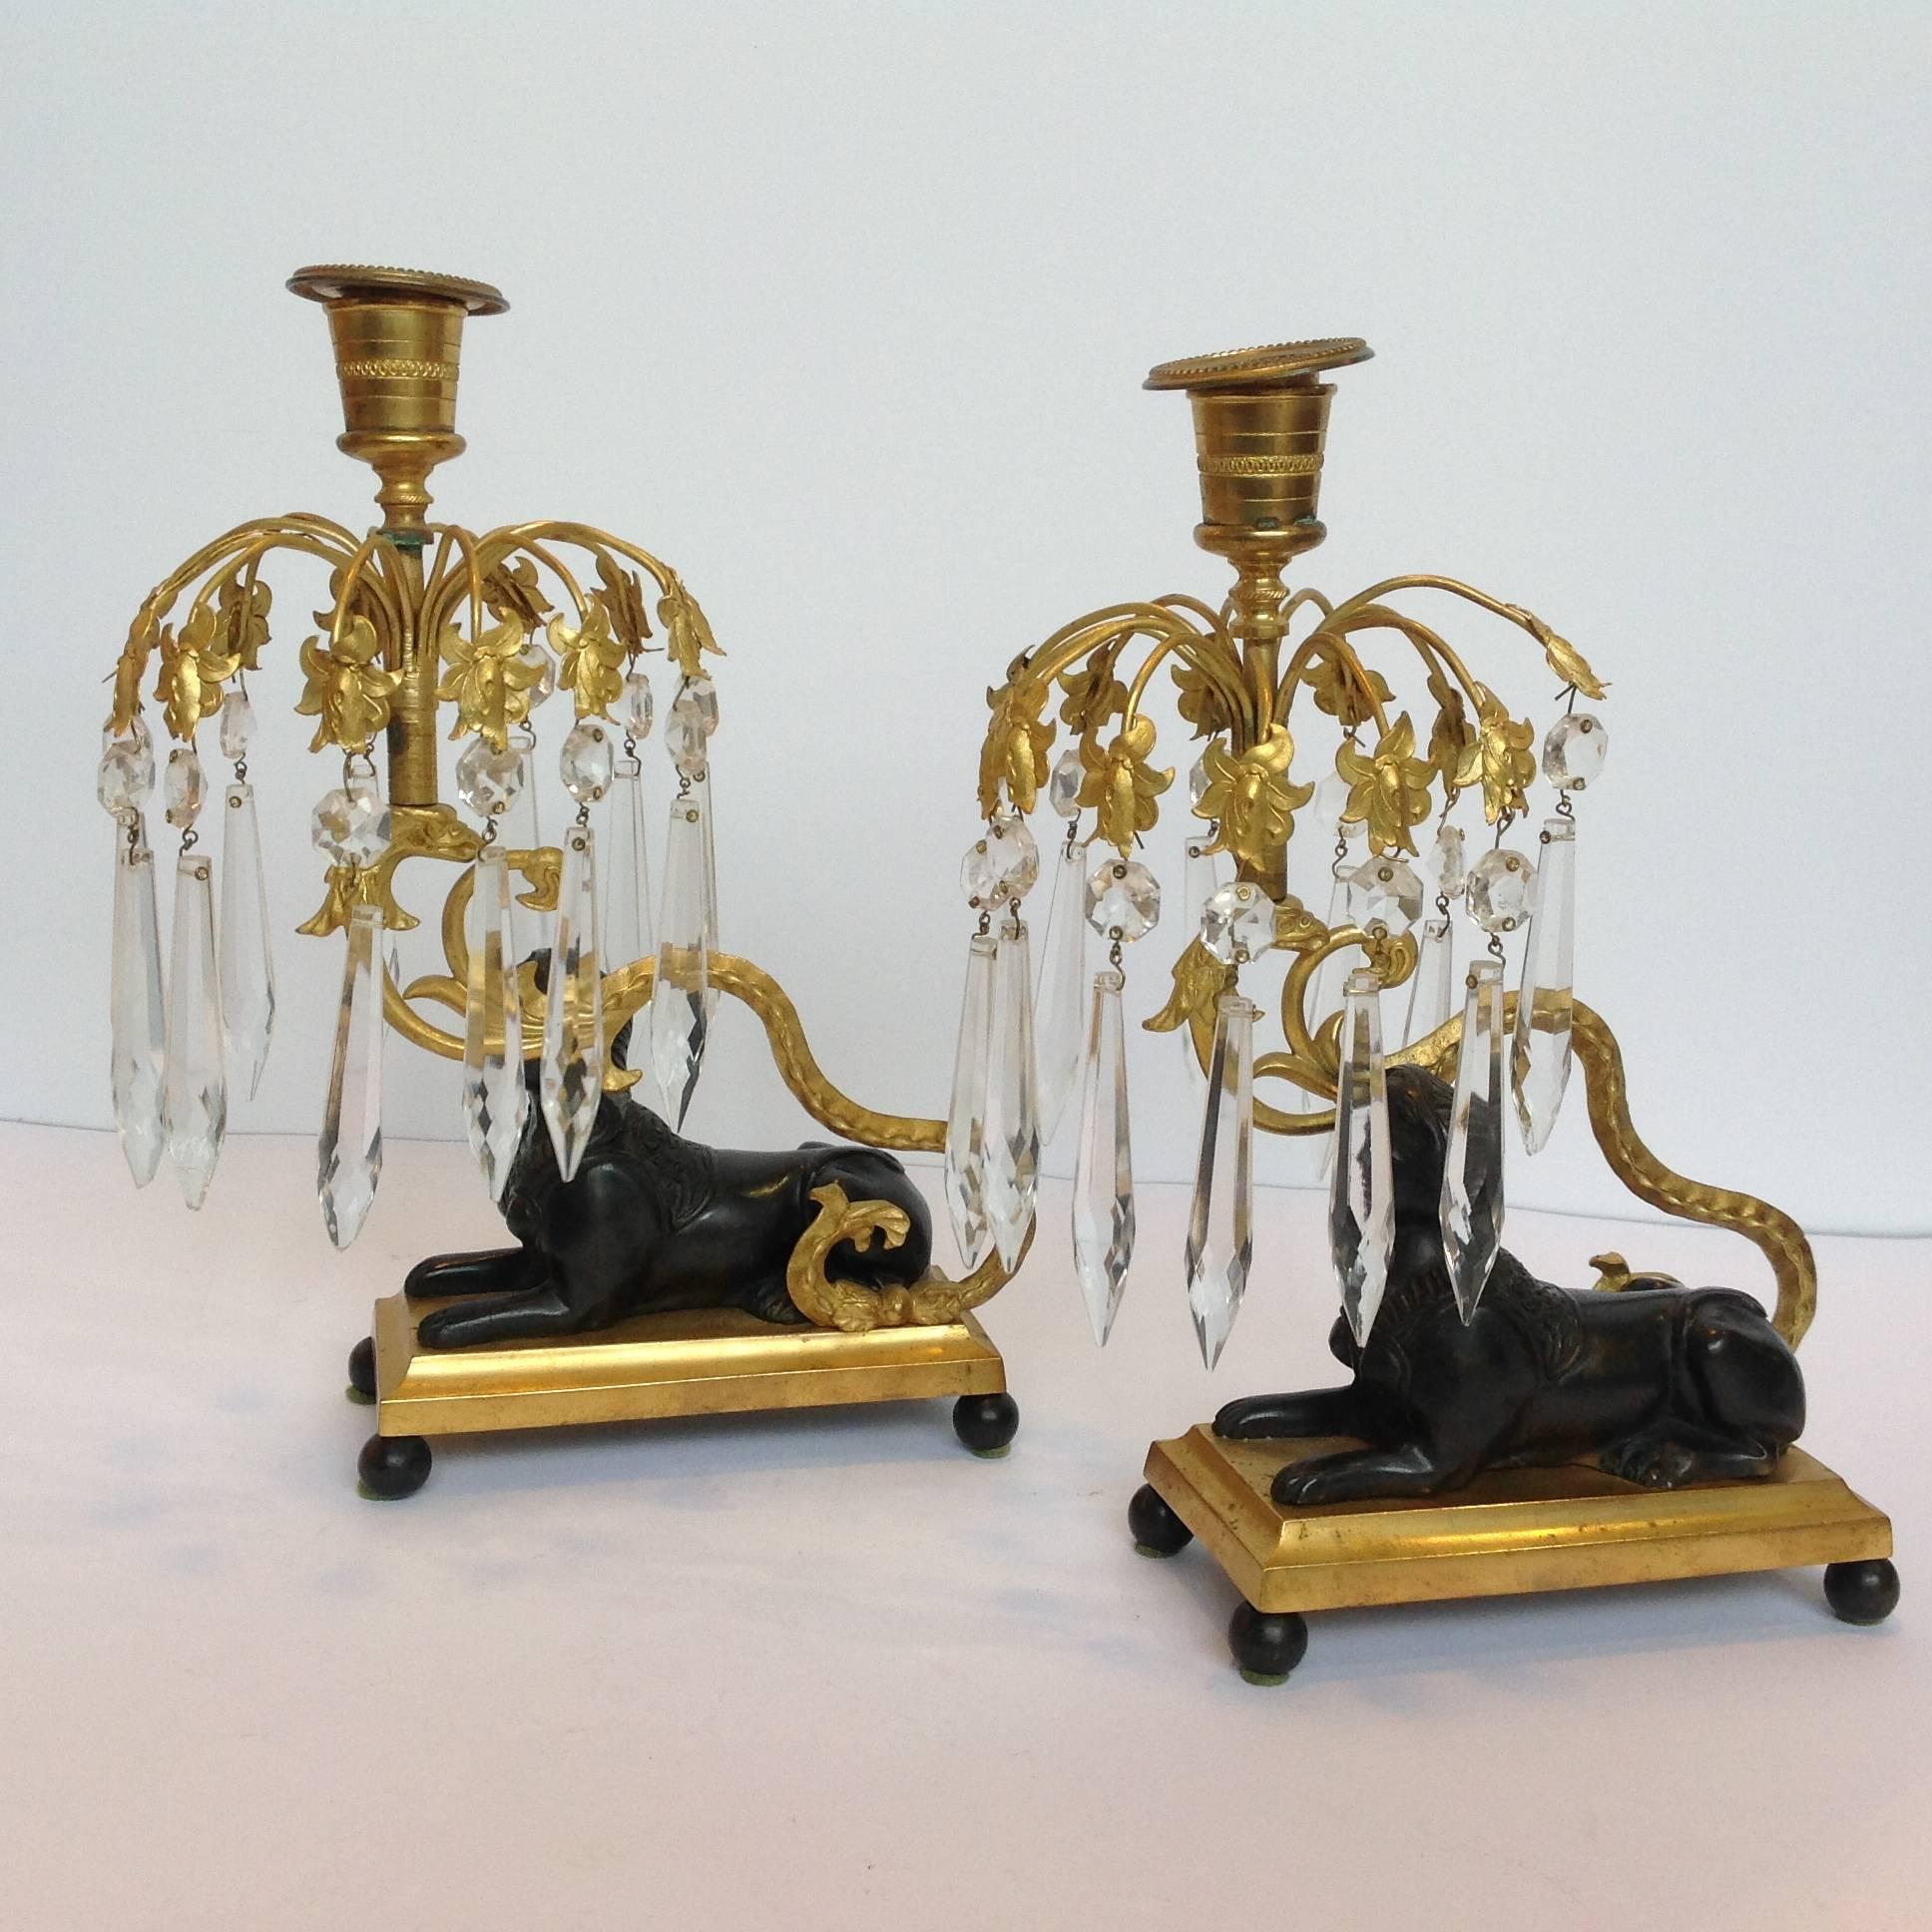 Regency period sphinx gilt bronze candlesticks with waved candle stick producing a canopy of crystals over the sphinx's head.